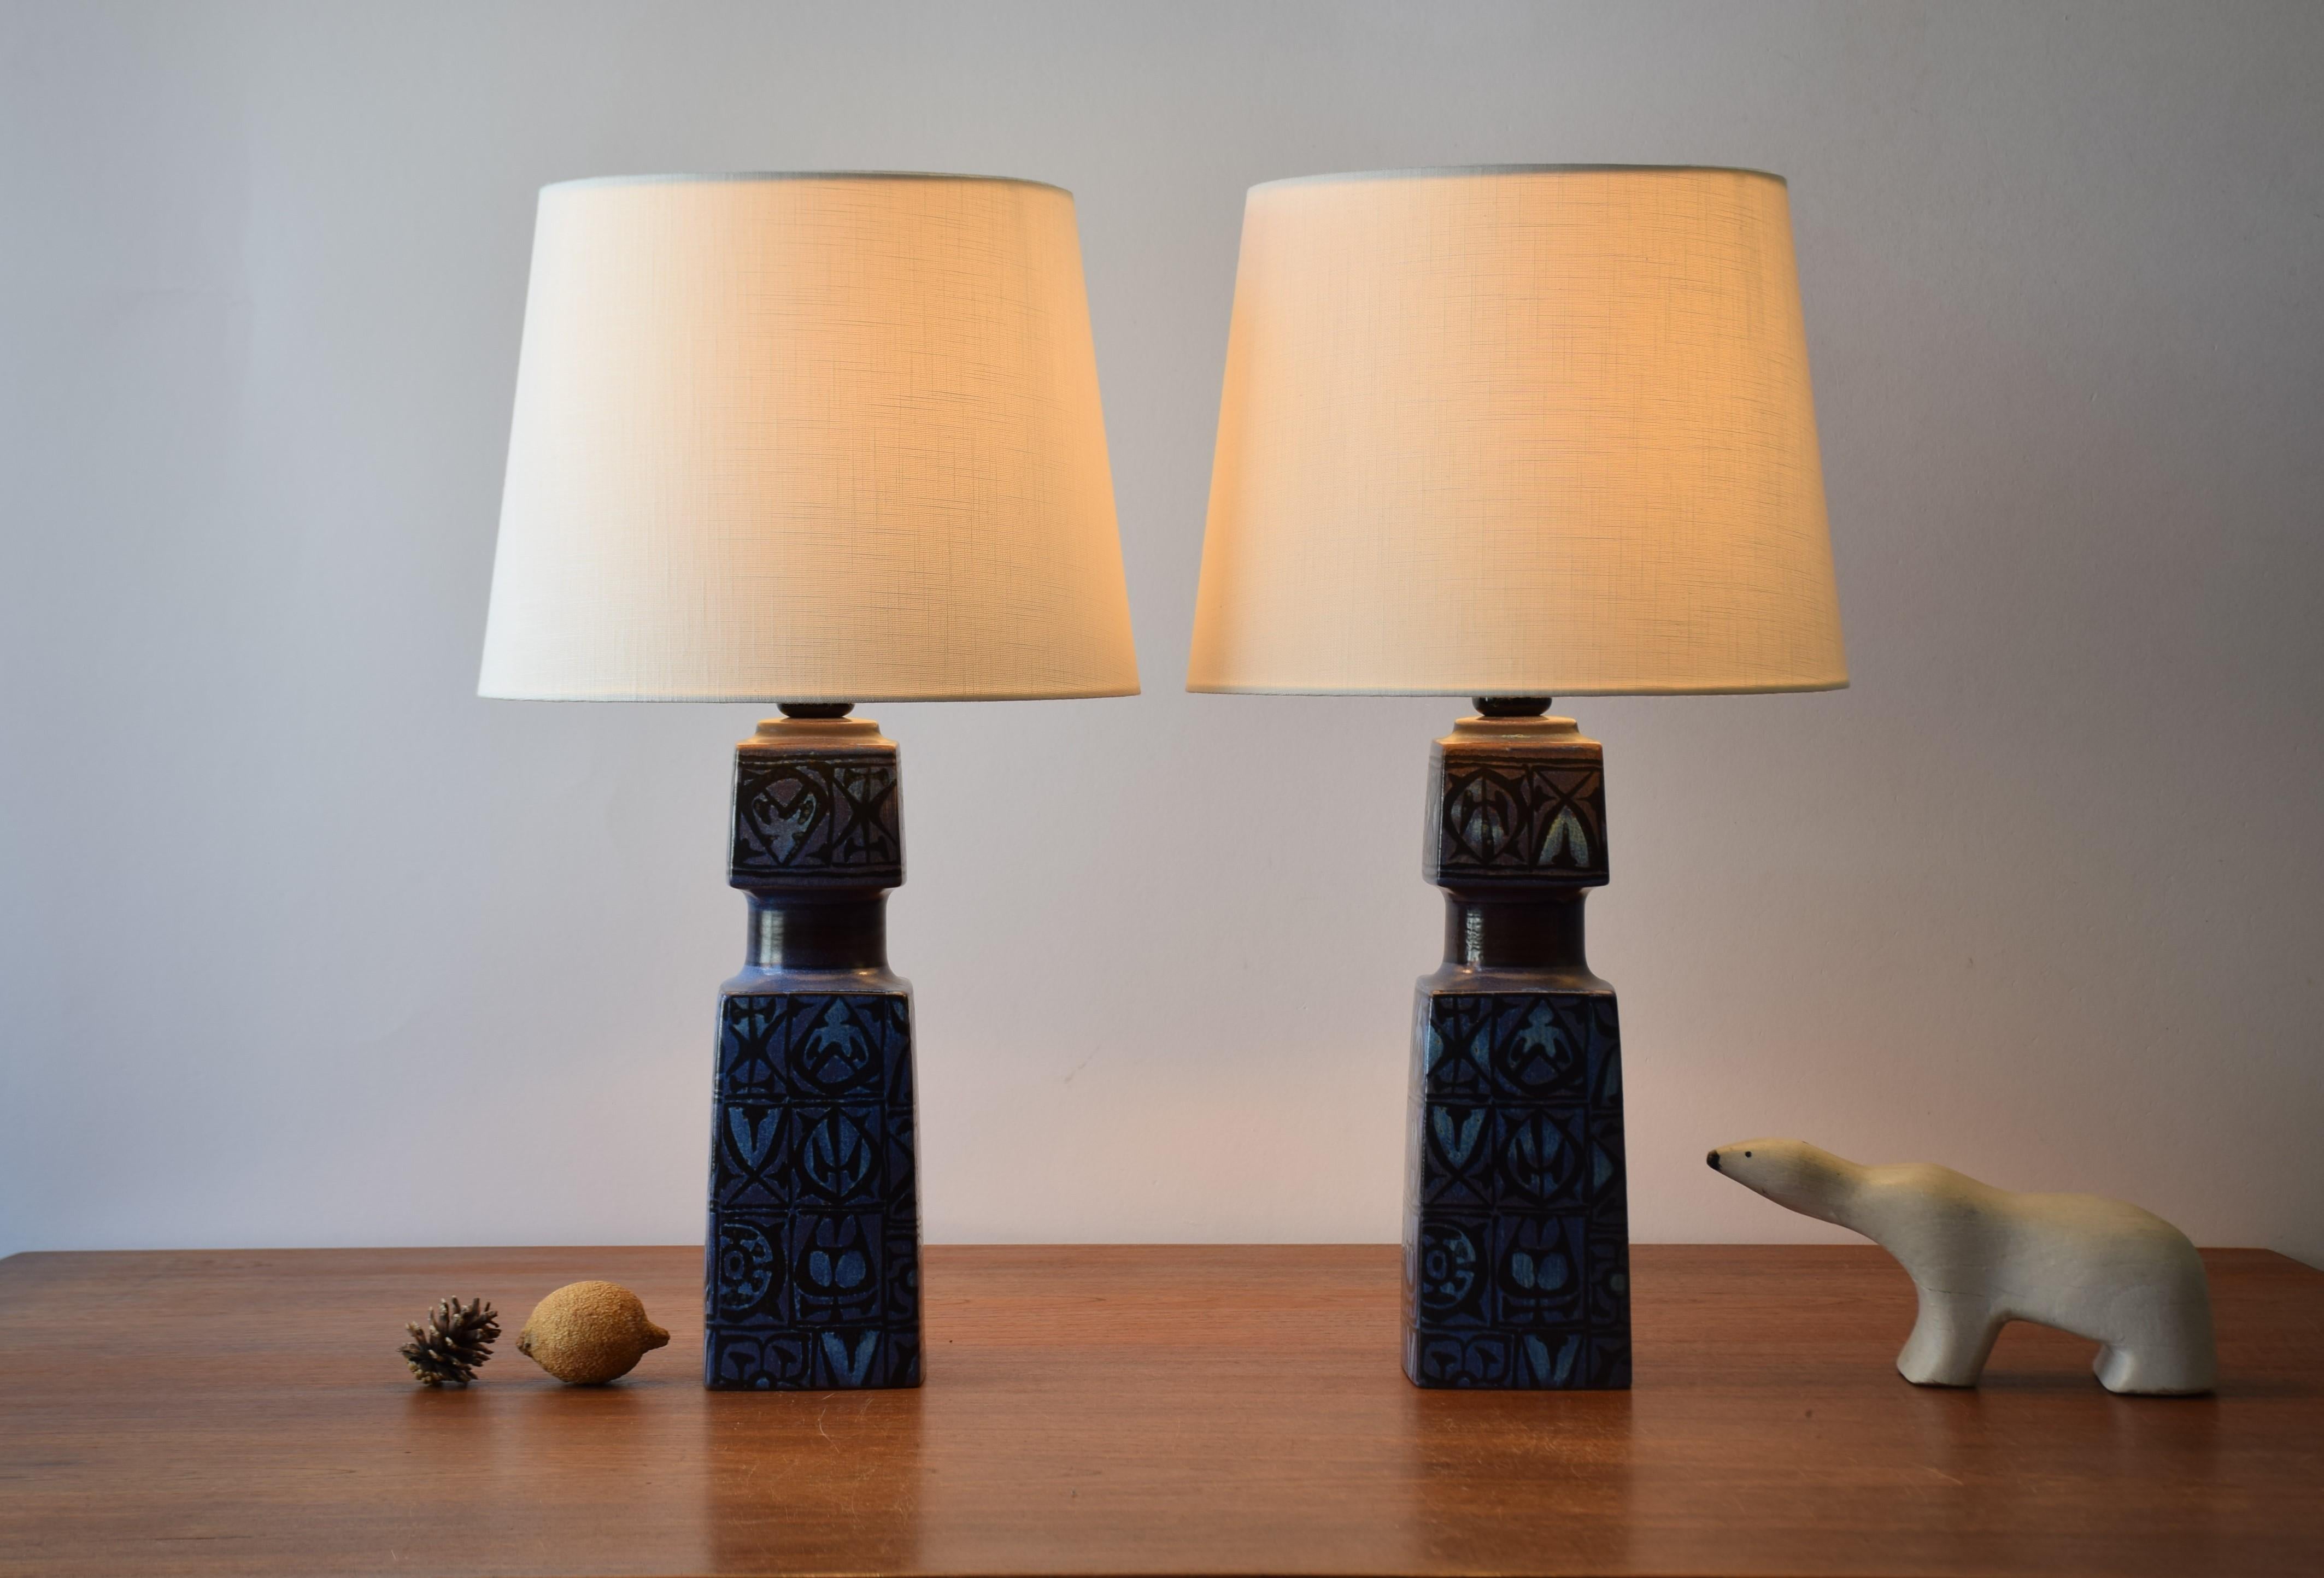 Pair of table lamps designed by Nils Thorsson for Royal Copenhagen and Fog & Mørup and made, circa 1970s.
They have a tactile abstract decor with black on dark blue.
The lamps are the larger version of this series.

Included is a set of new